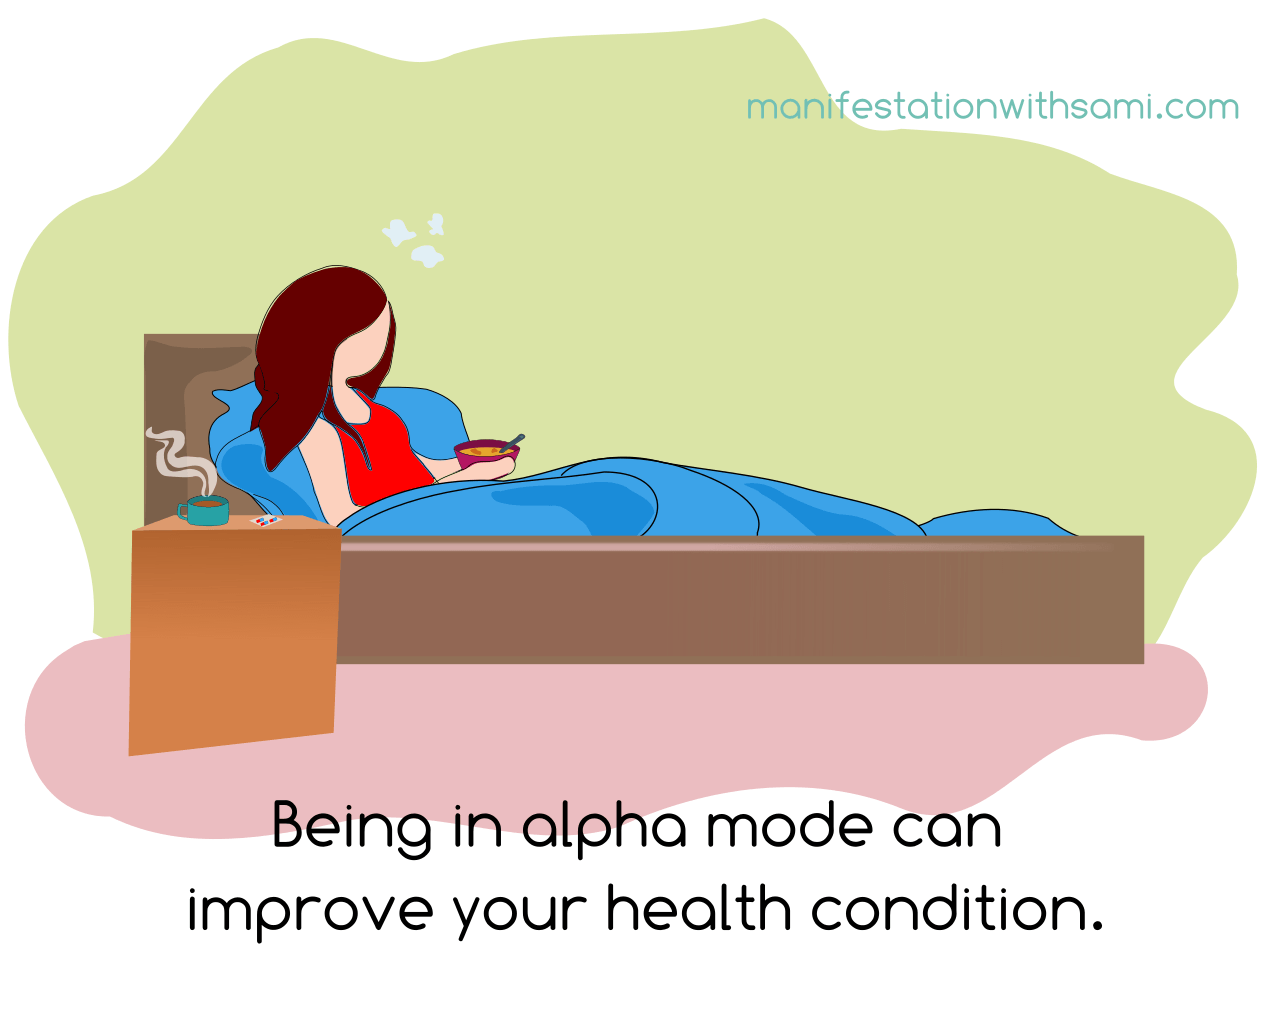 Being in the alpha mode can improve your health condition.